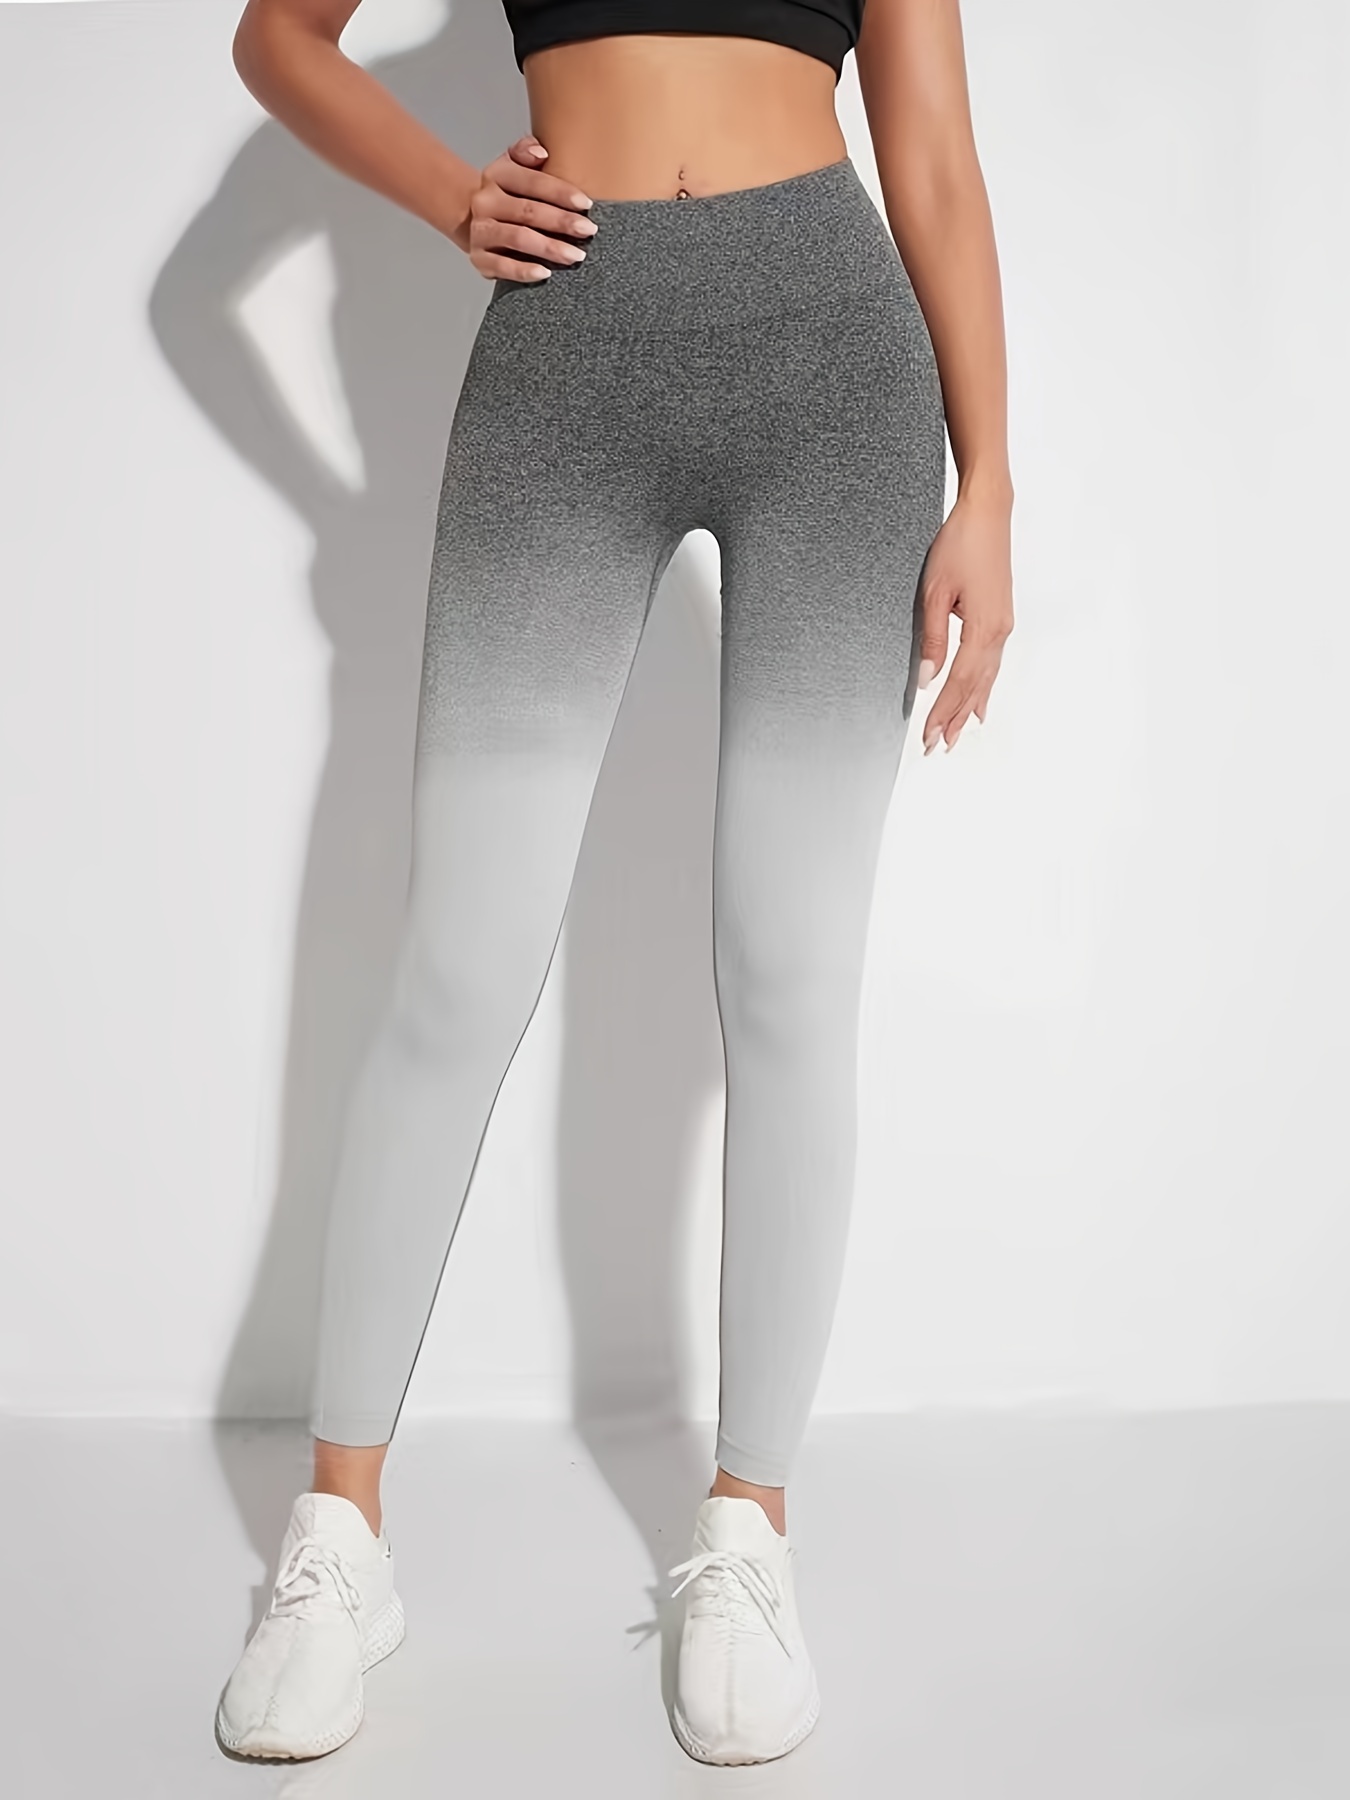 Ombre Seamless High Waist Seamless Yoga Tights For Women Sexy Booty Leggings  With Scrunch Butt Pink Fitness Sports Tights H1221 From Mengyang10, $11.66